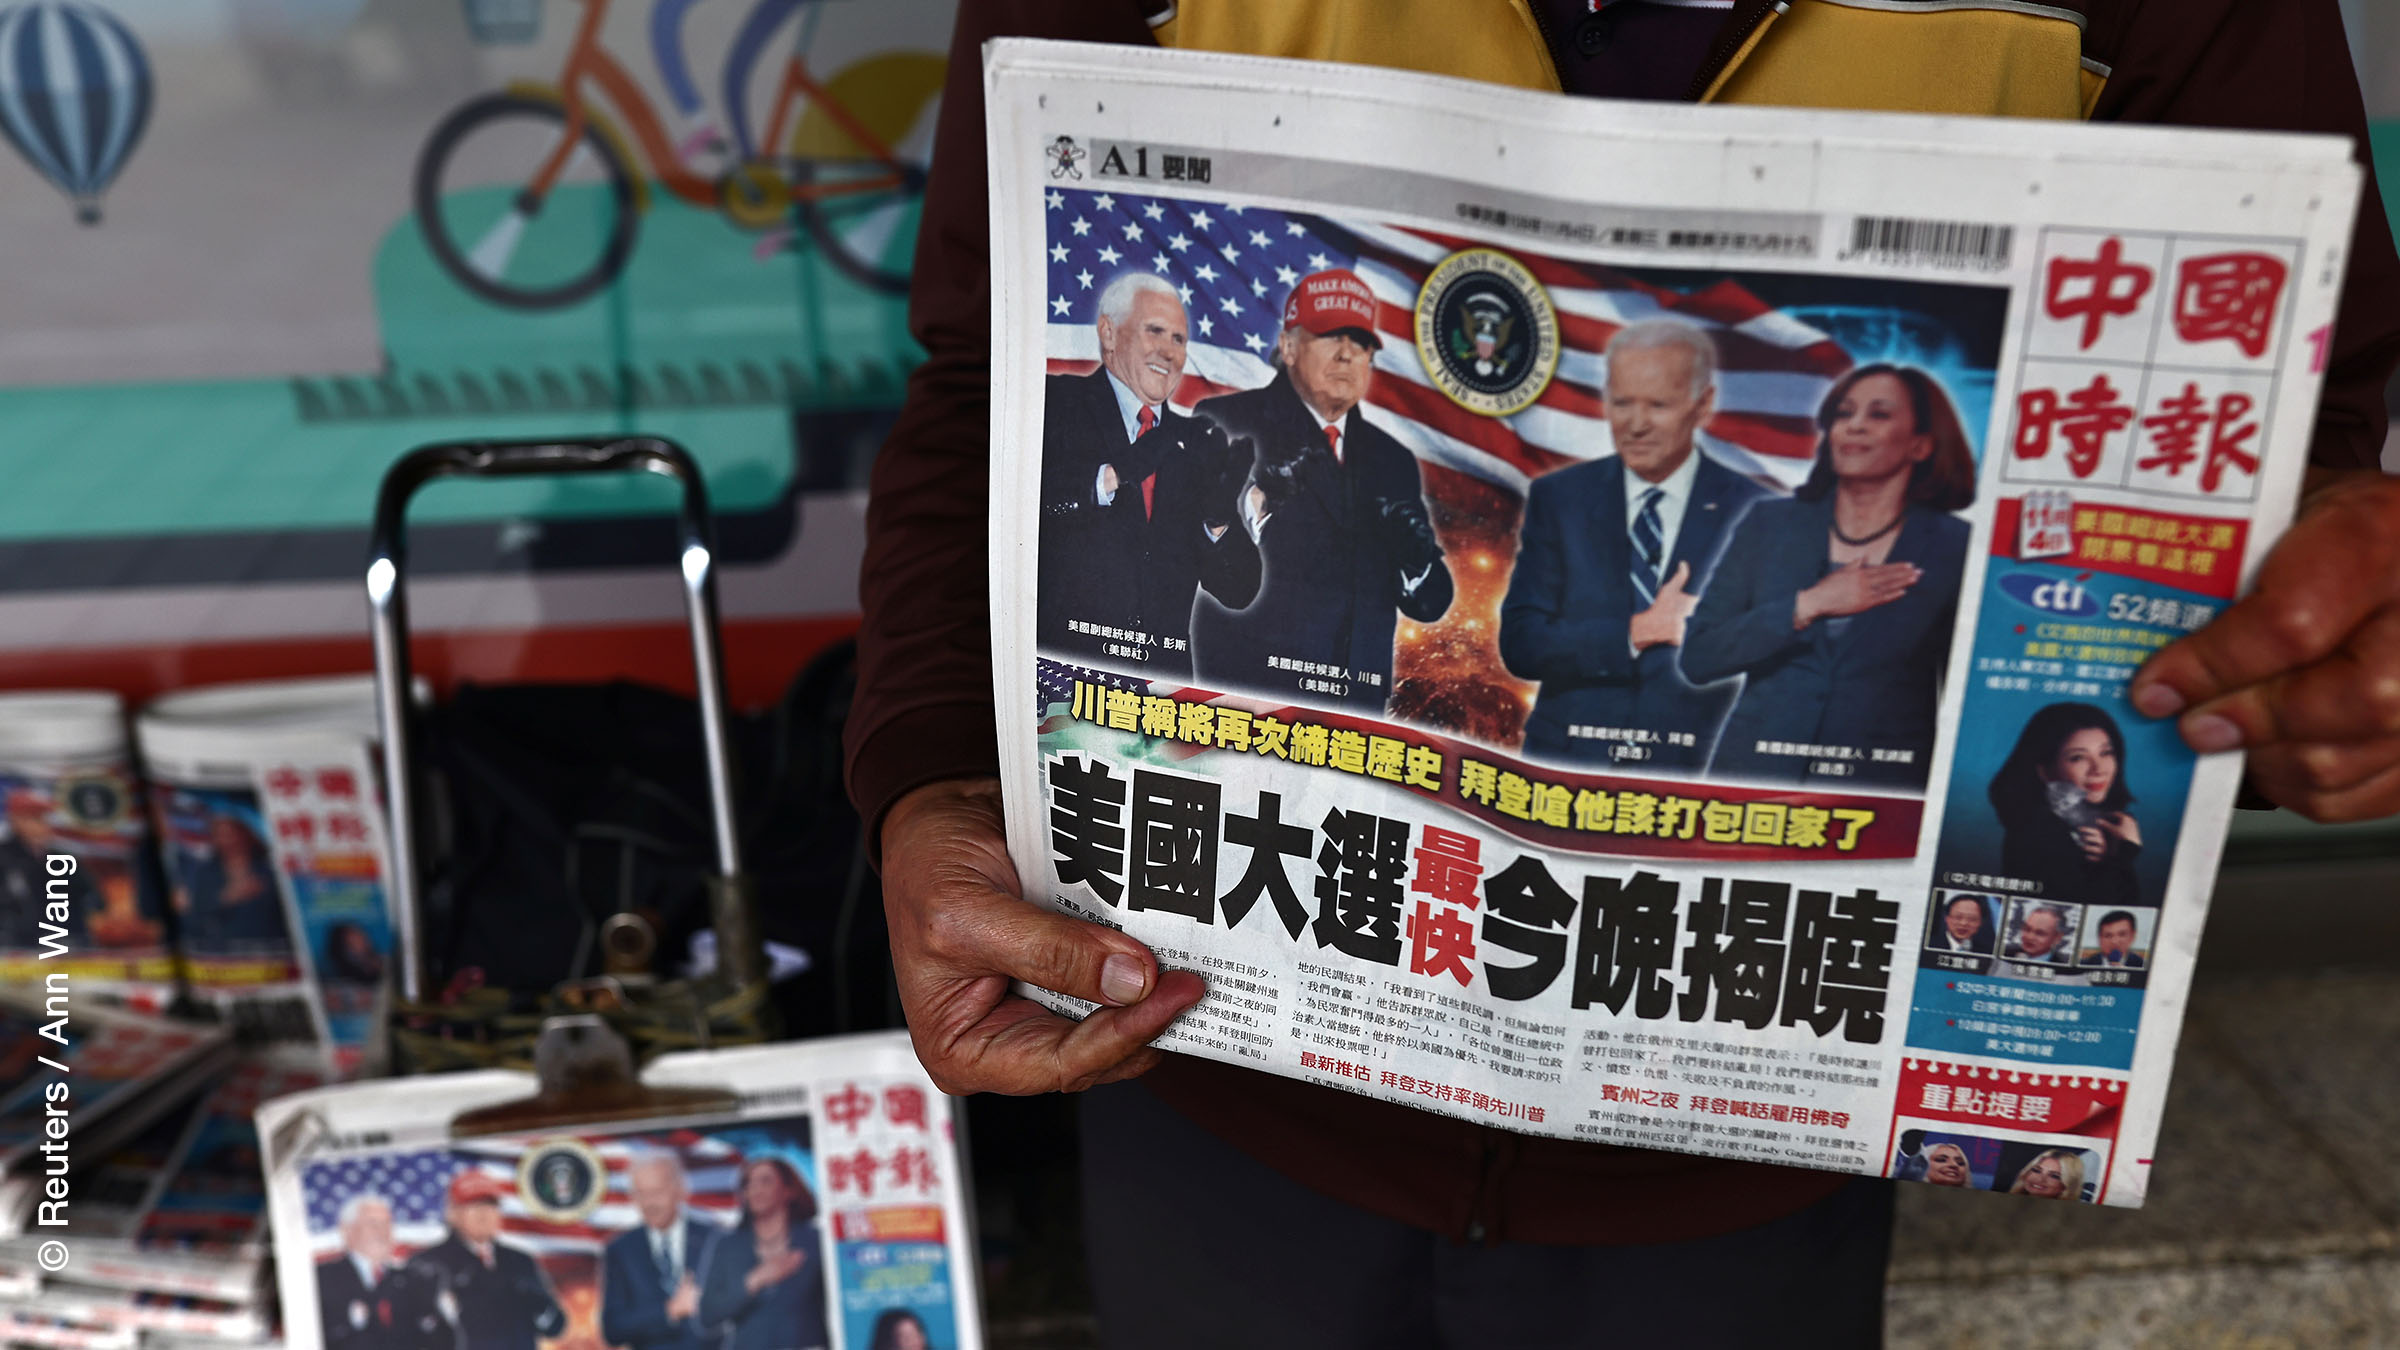 A man sells newspapers with front page articles about the U.S. election along a street in Taipei, Taiwan.